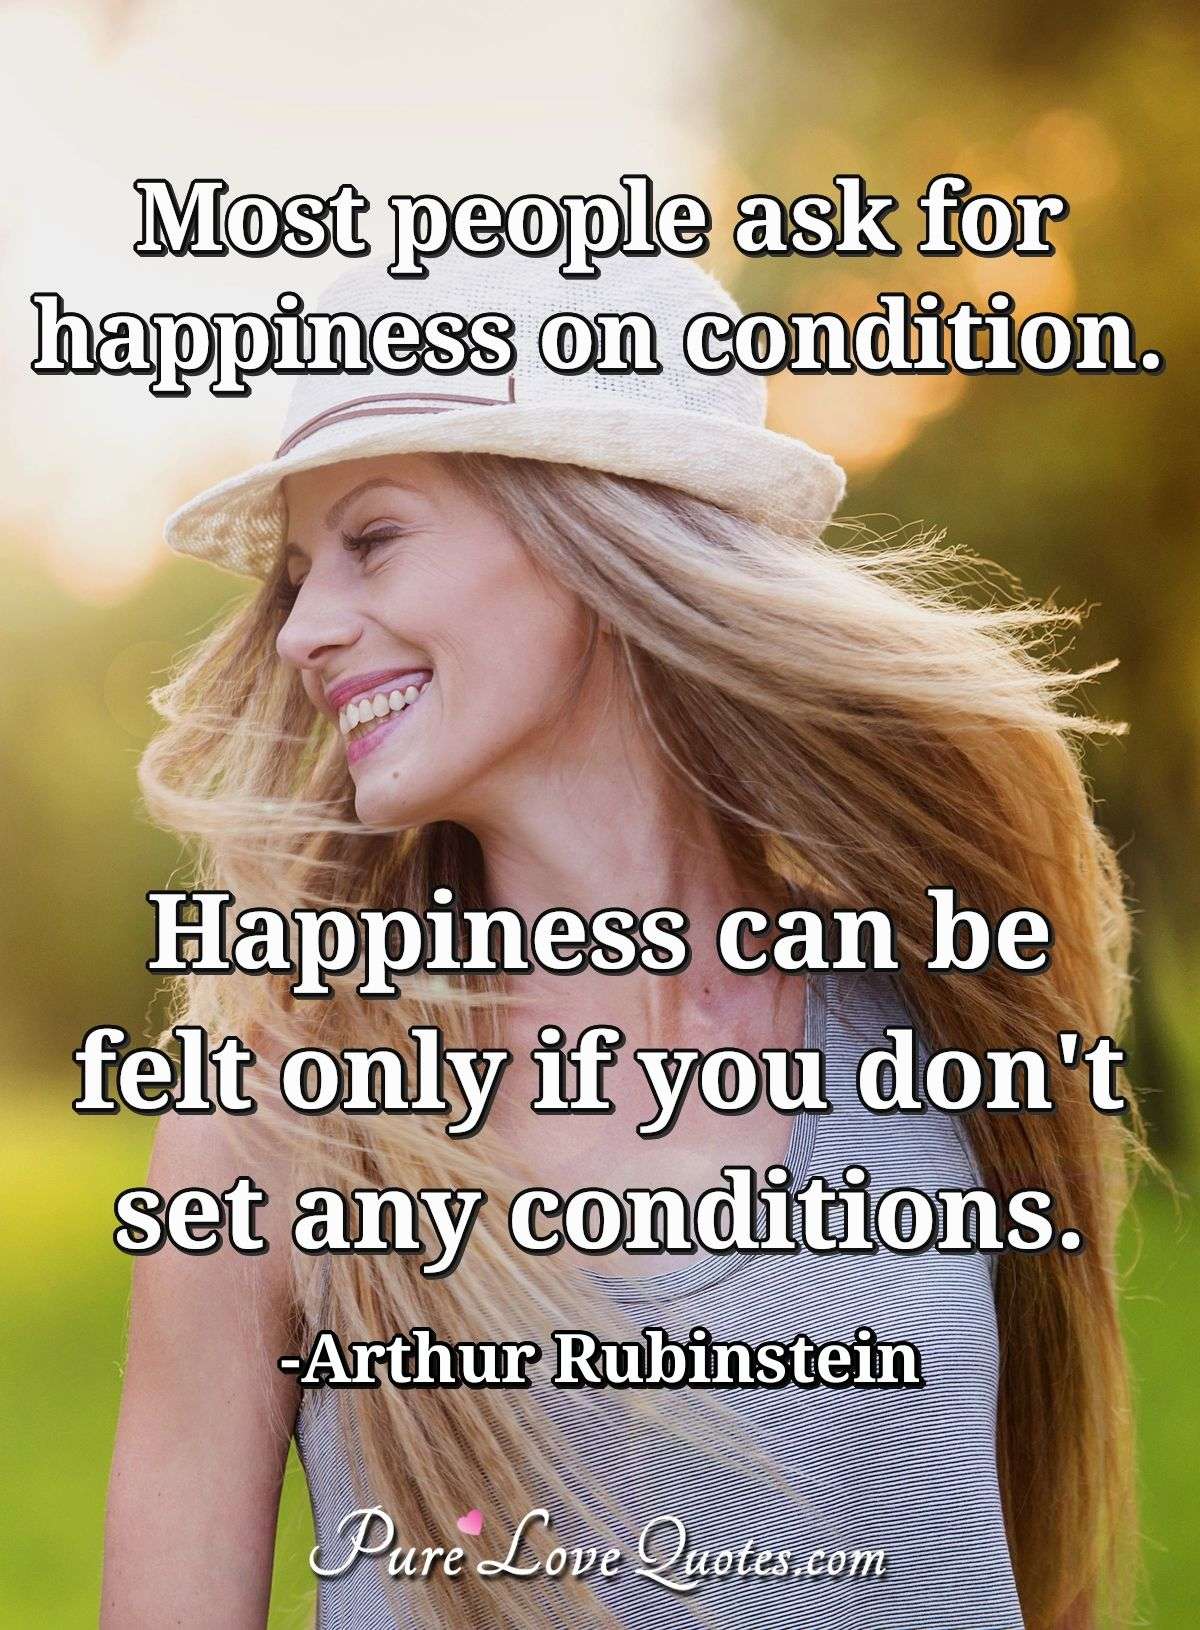 Most people ask for happiness on condition. Happiness can be felt only if you don't set any conditions. - Arthur Rubinstein